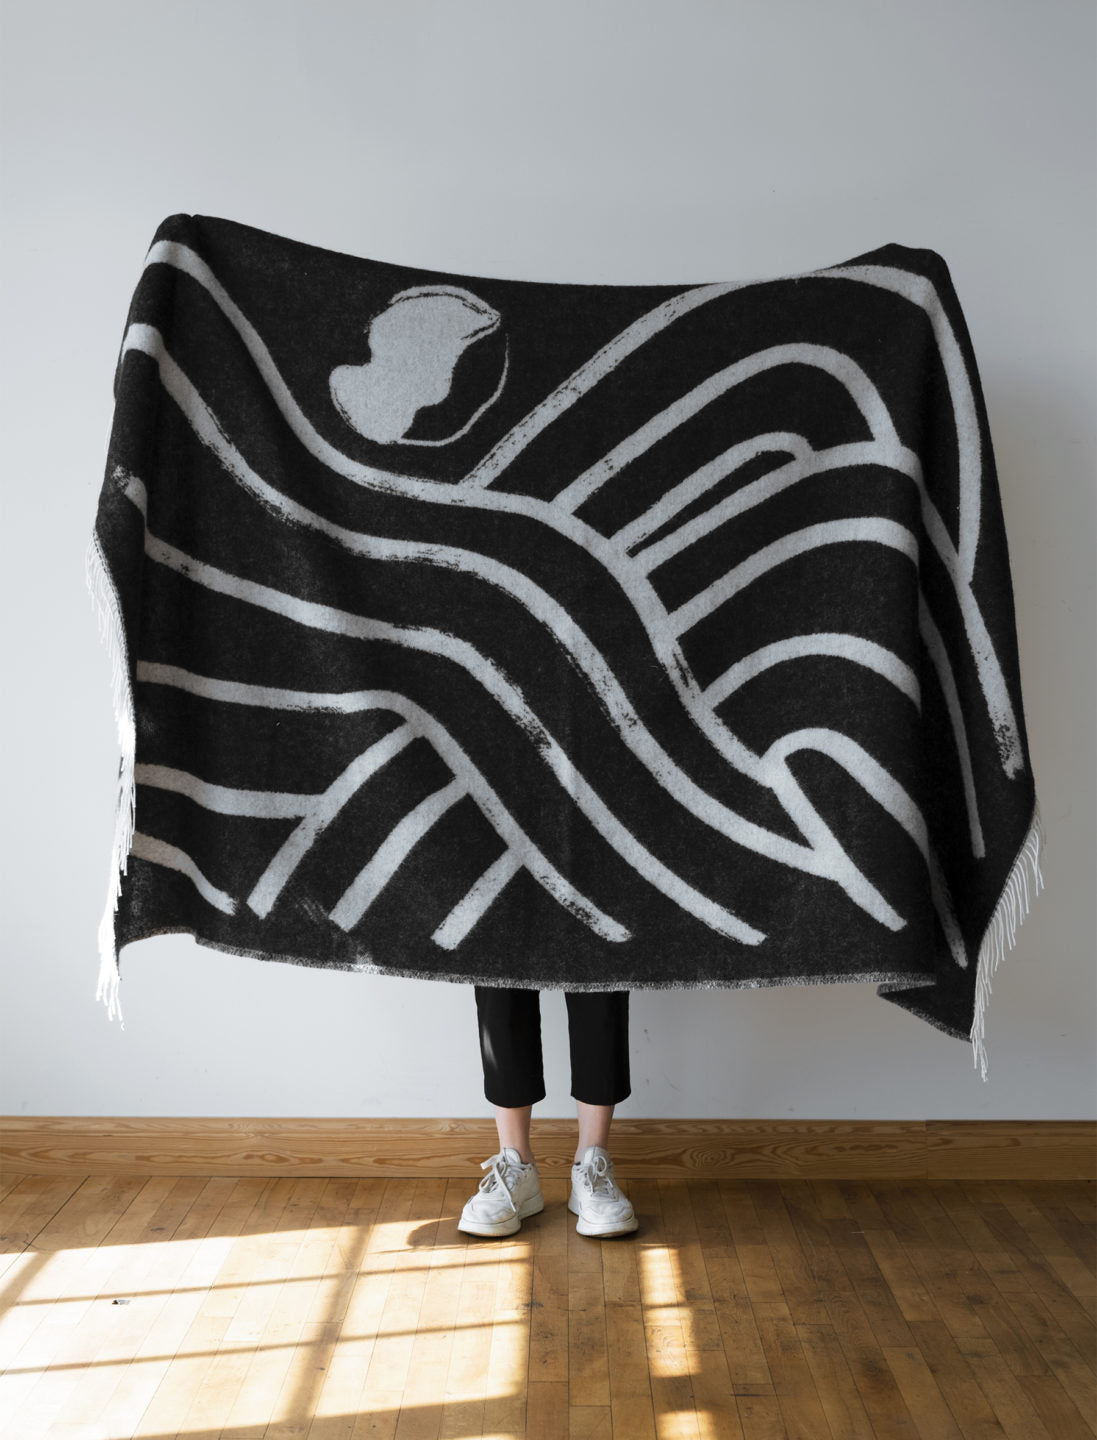 A person folds a full size dark grey with light grey patterned lambswool blanket from a collaboration between Sofia Lind and Fine Little Day